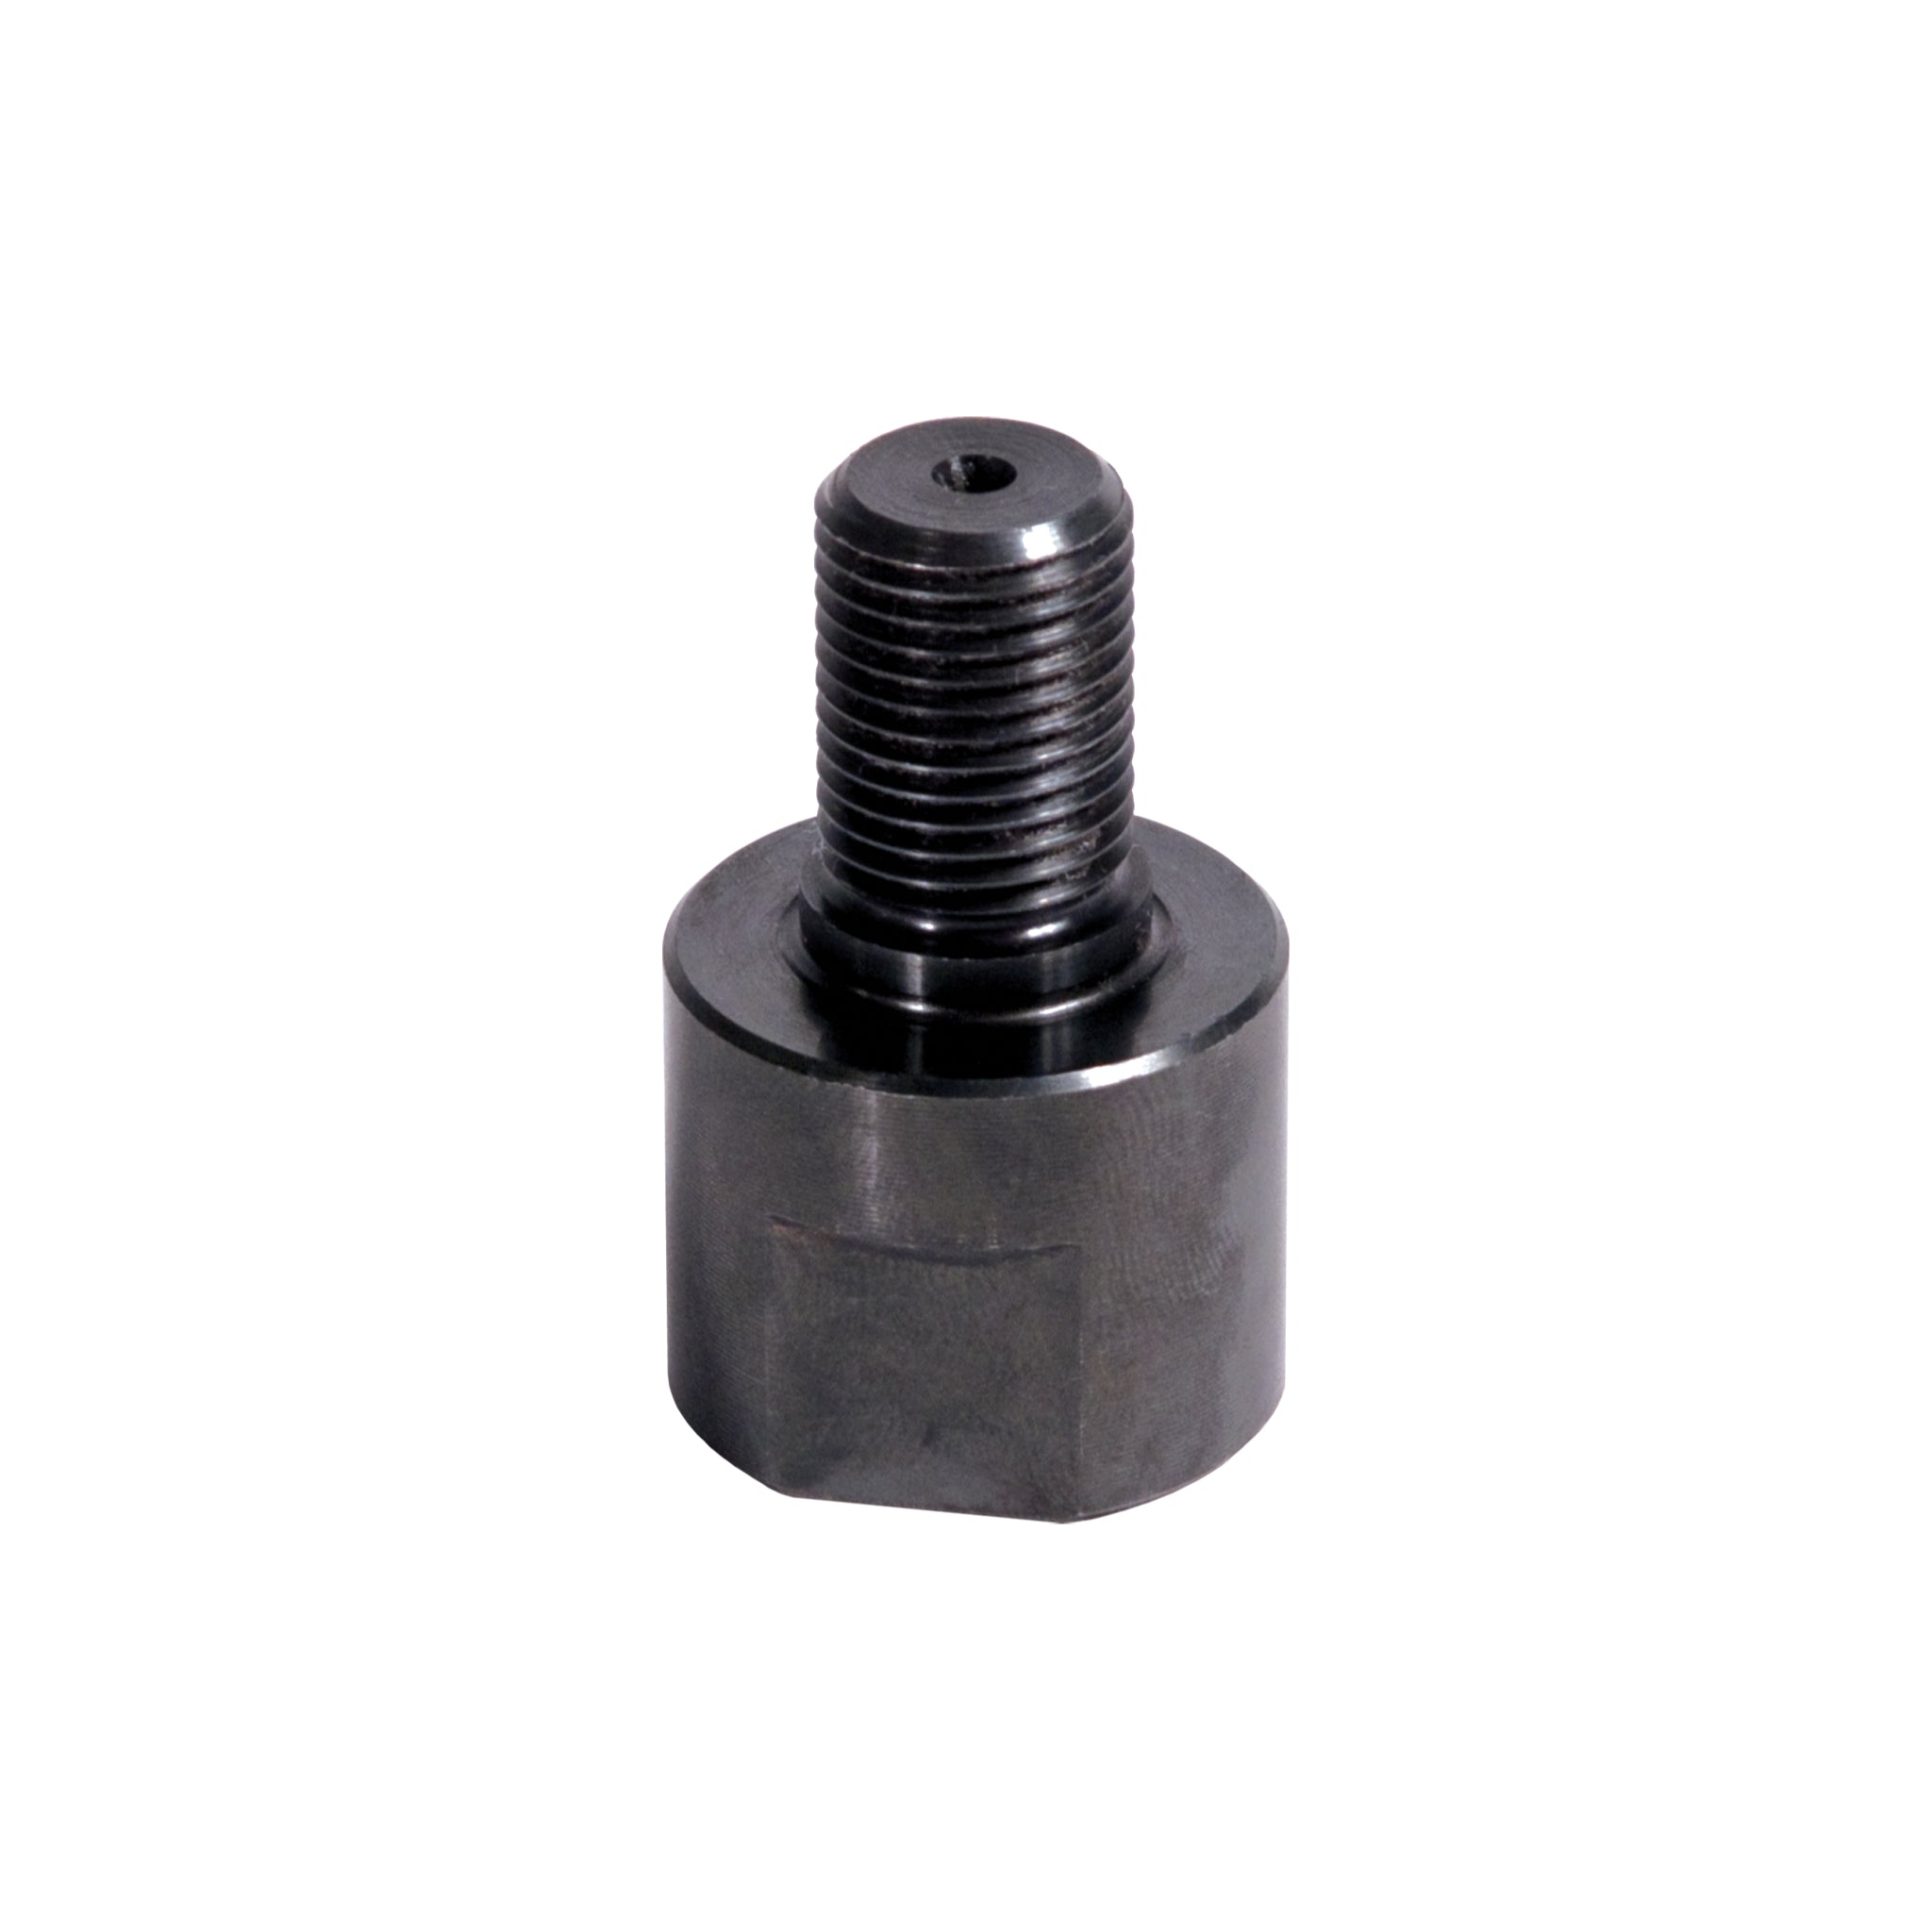 Chuck to Spindle Adapters for Hougen Mag Drills - 01829 - CelticMagDrills.ca